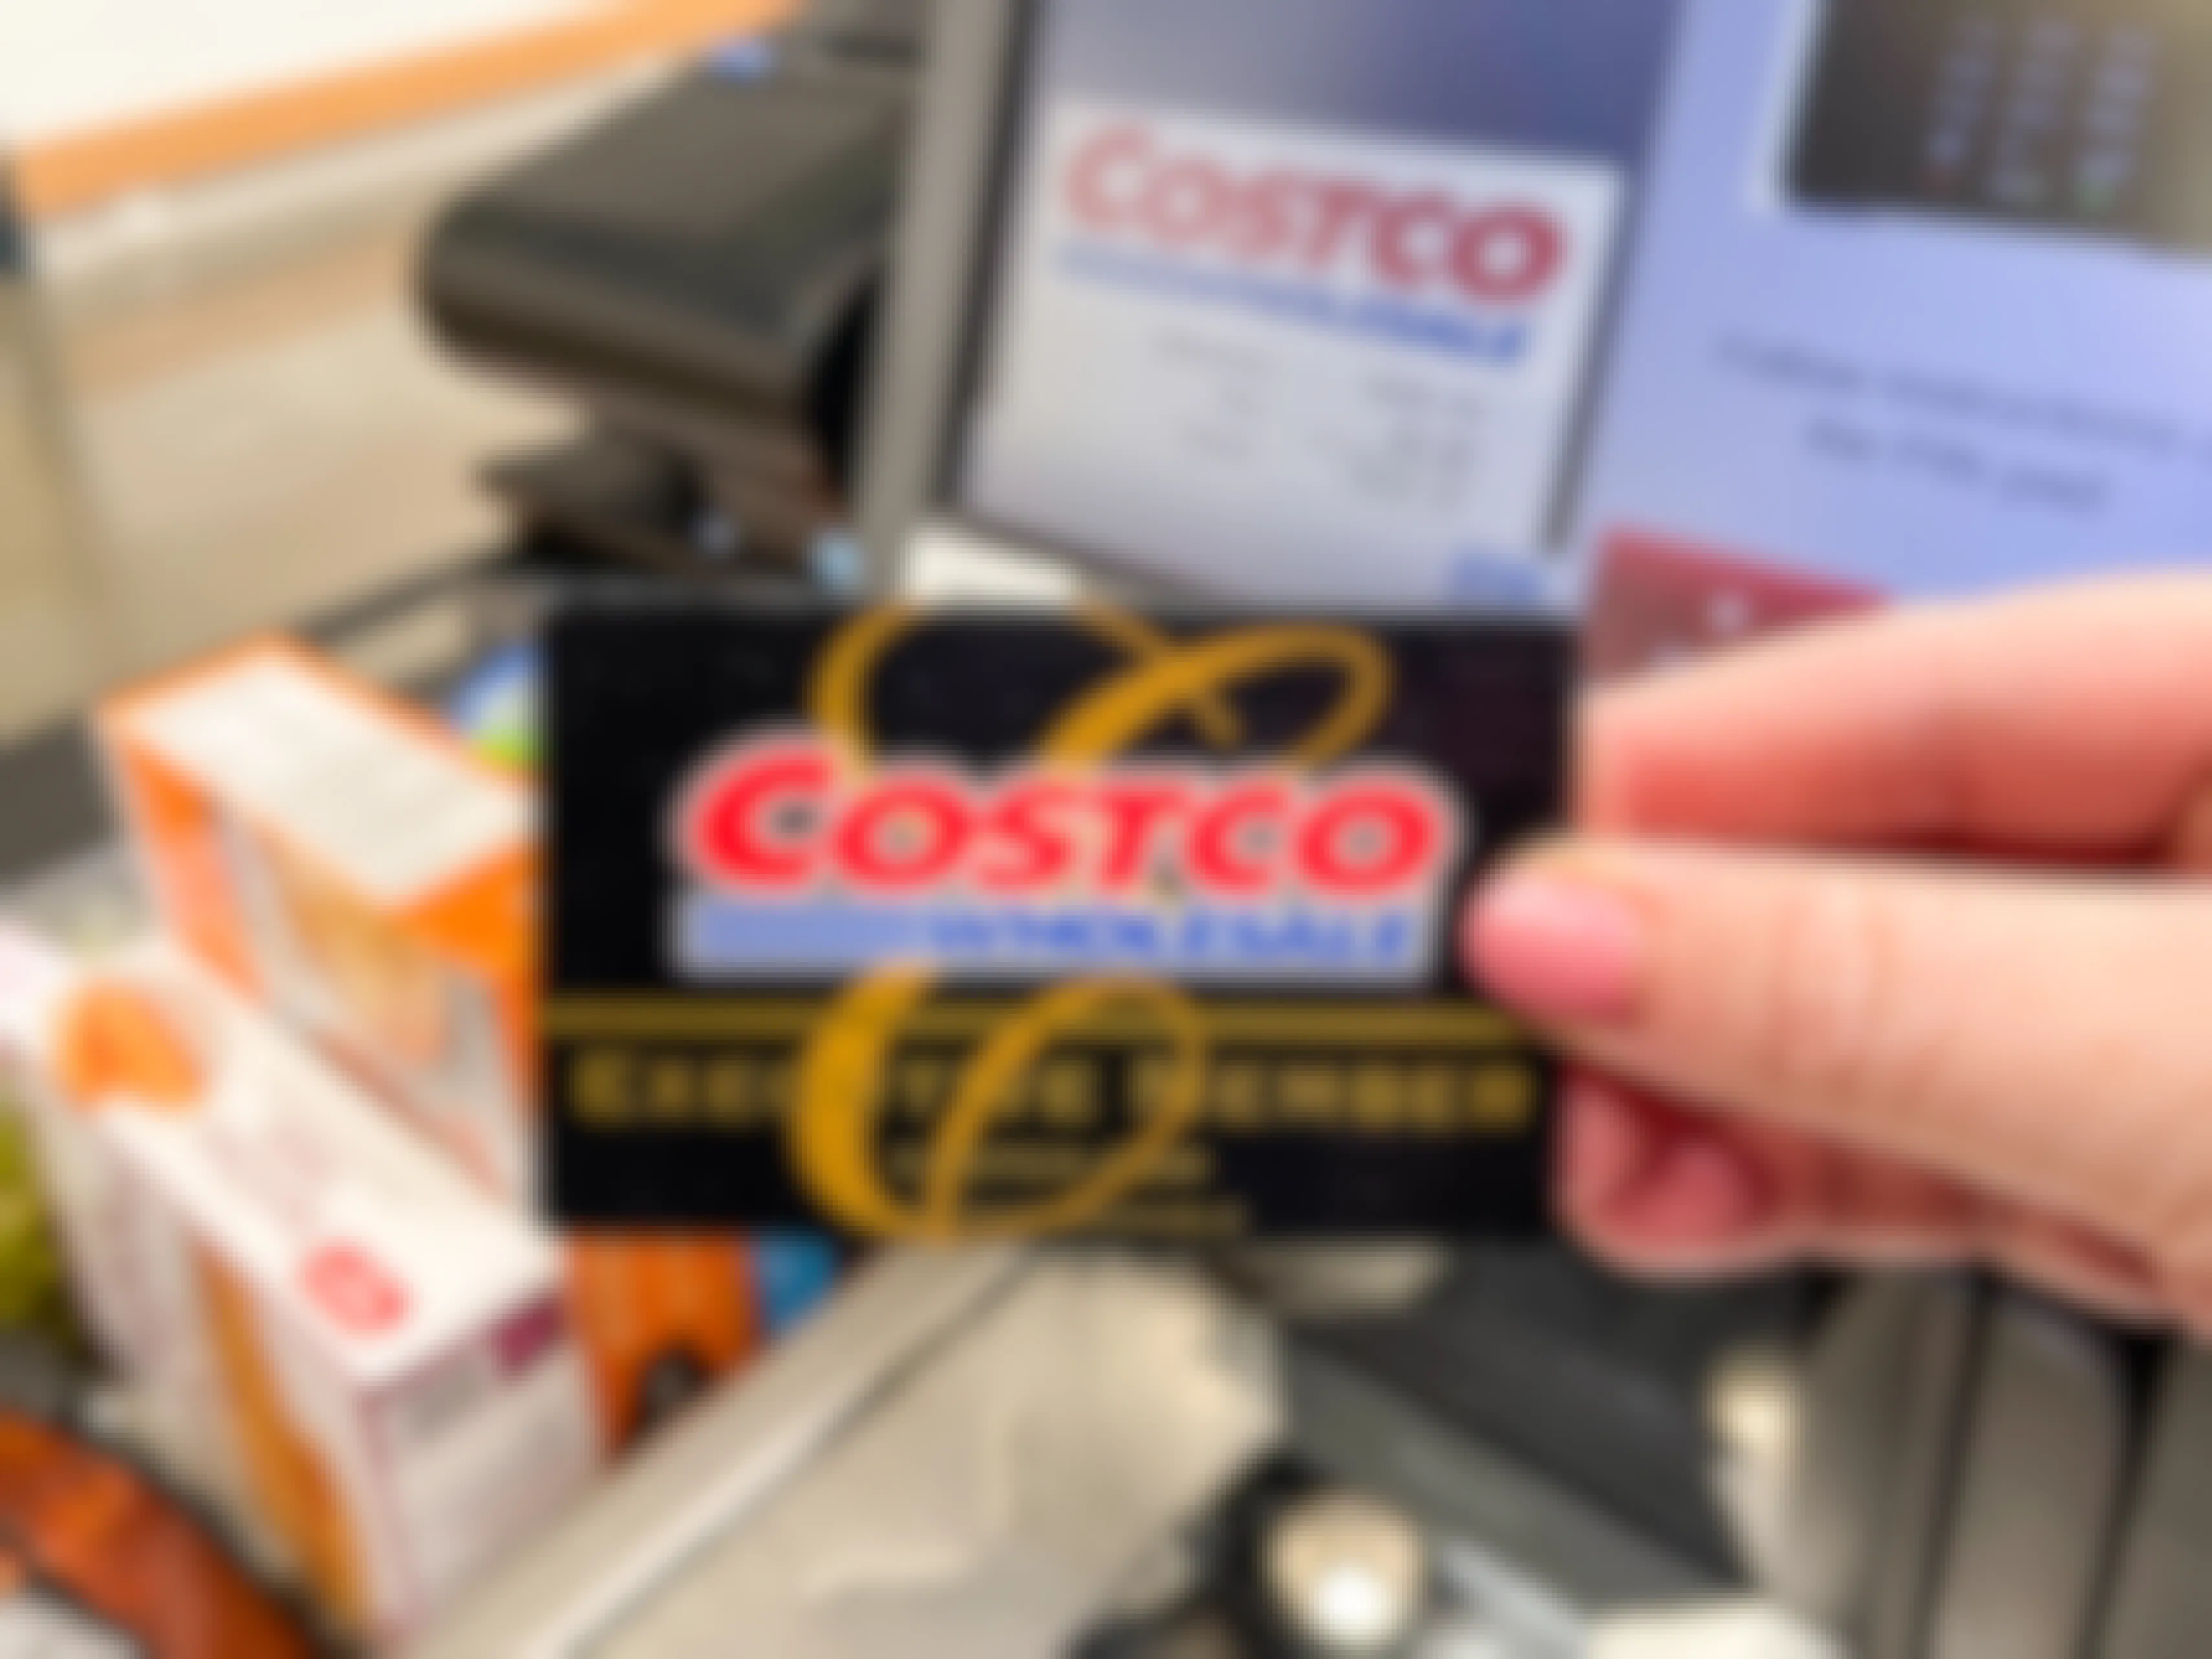 Is a Costco Membership Worth It? Here's How Much Food, Gas & Wine You'd Need To Buy